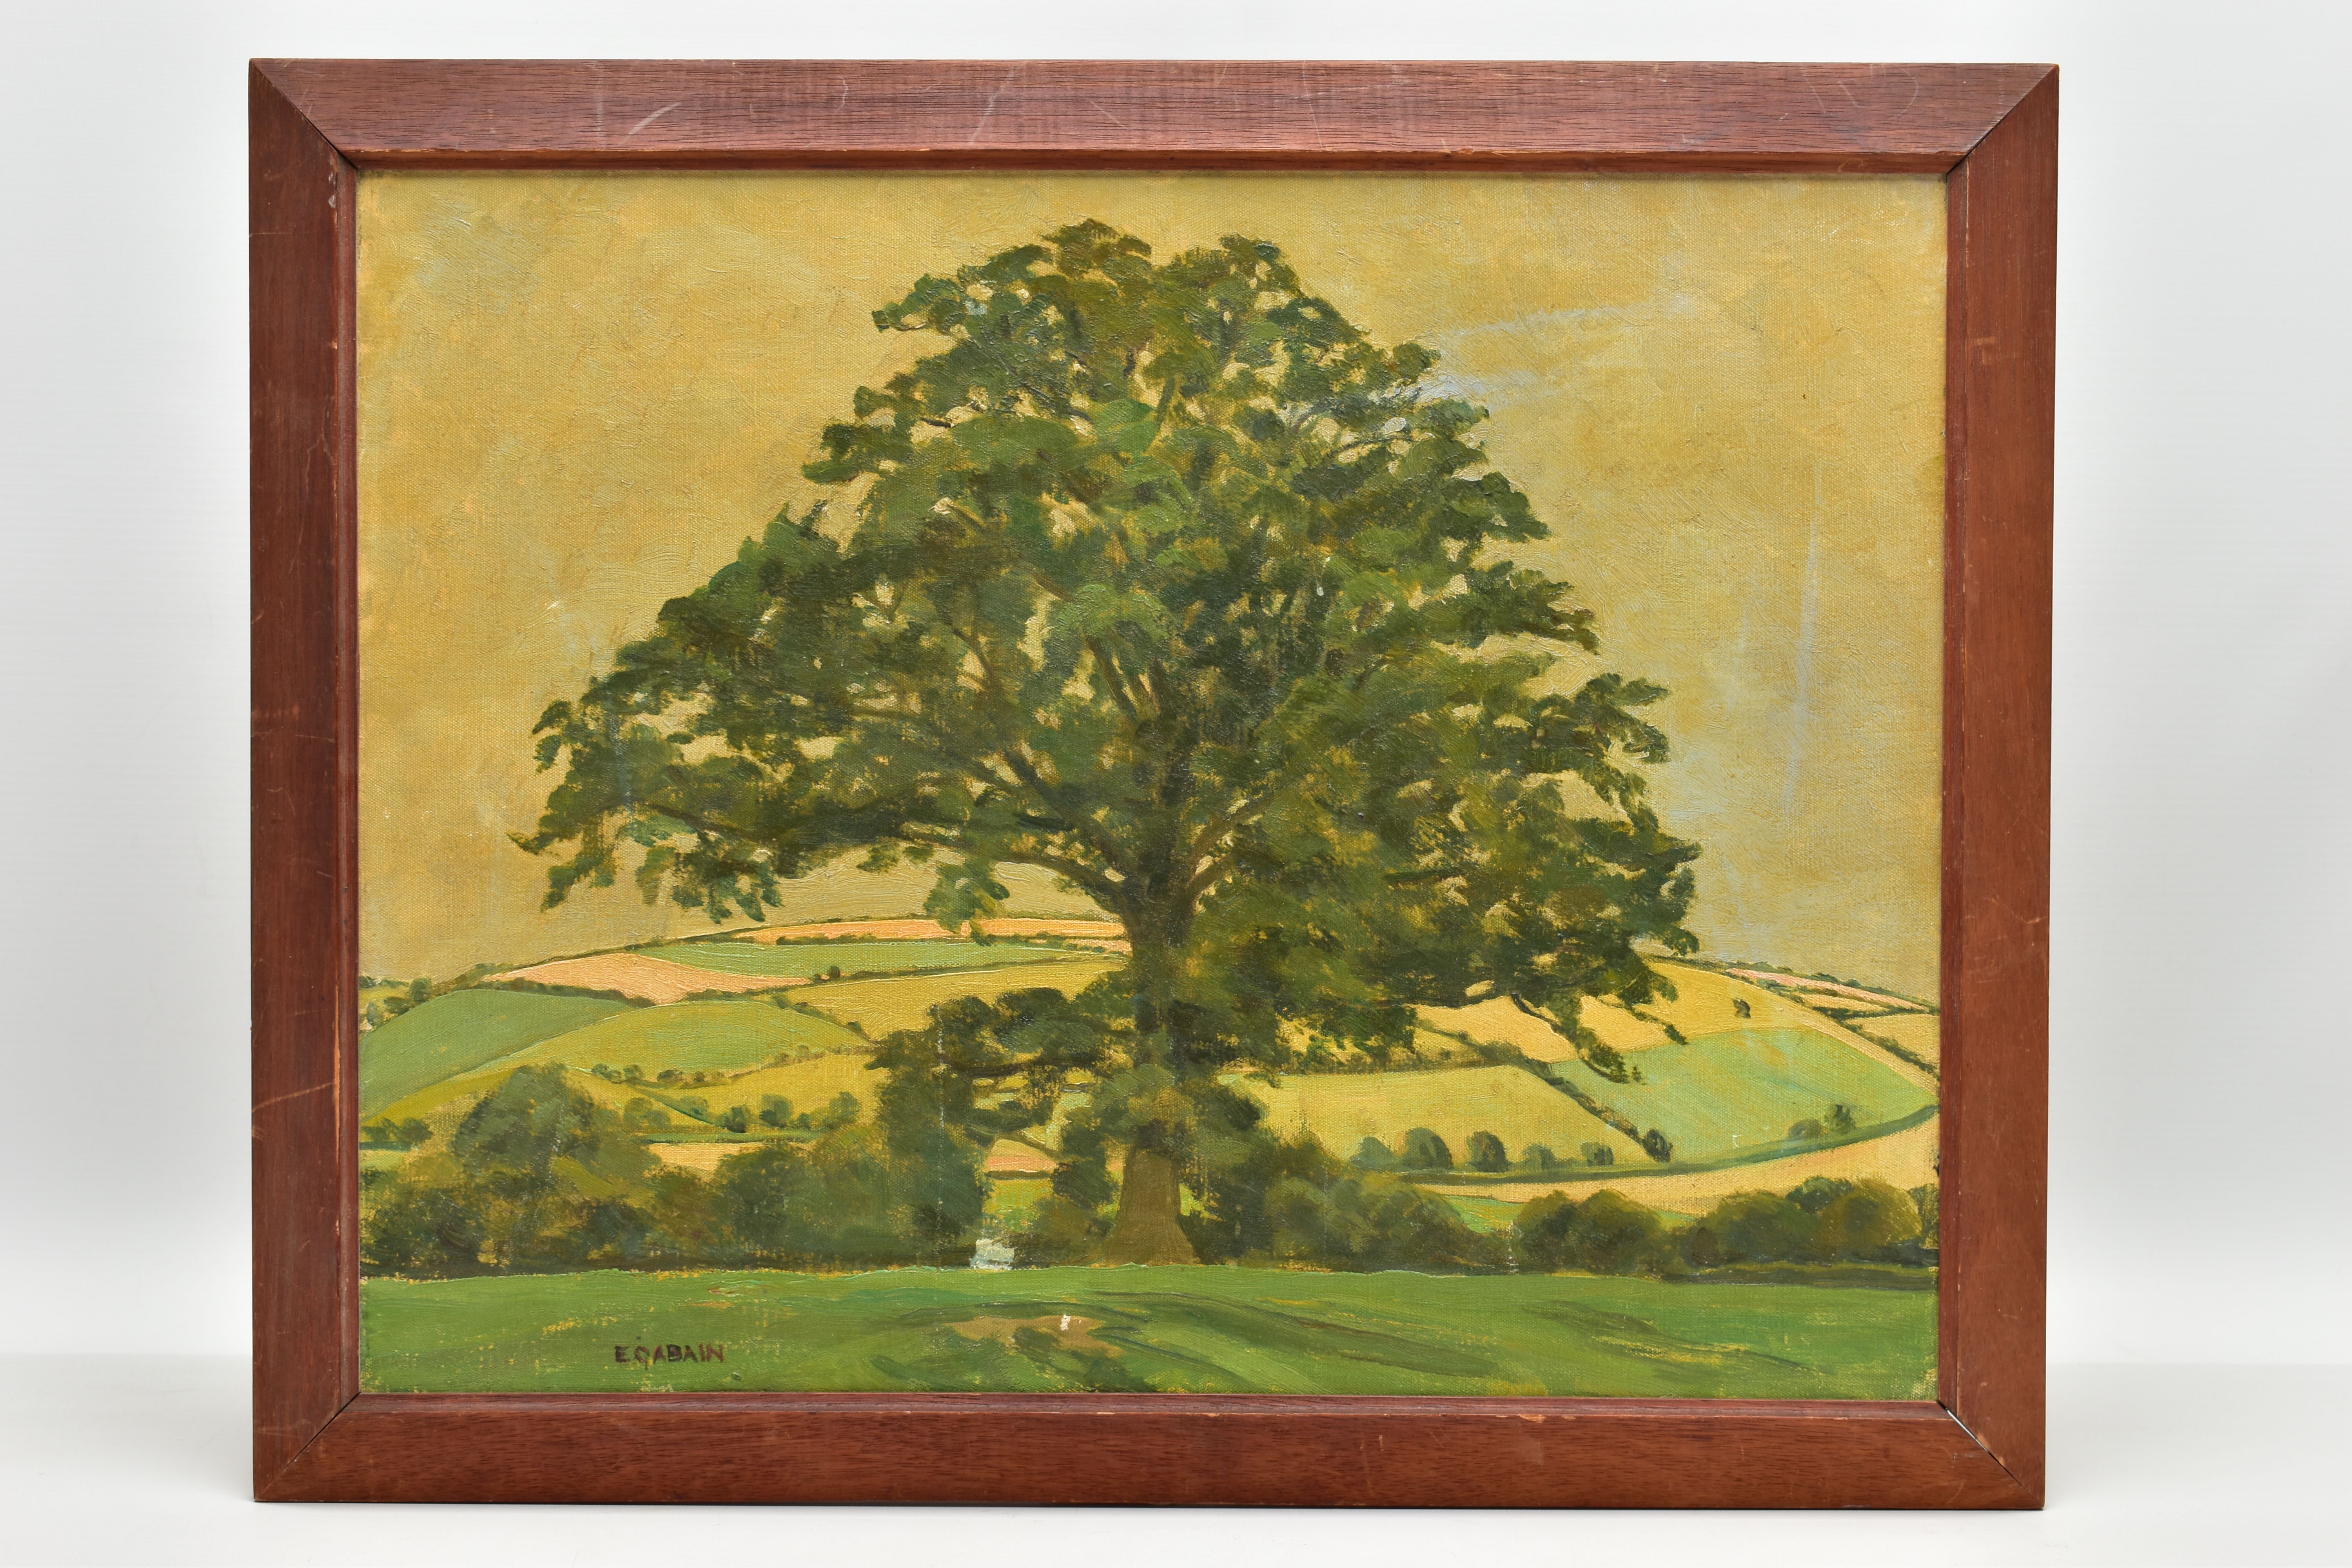 ETHEL GABAIN (FRENCH/BRITISH 1883-1950) A LANDSCAPE FEATURING A SOLITARY OAK TREE, signed lower